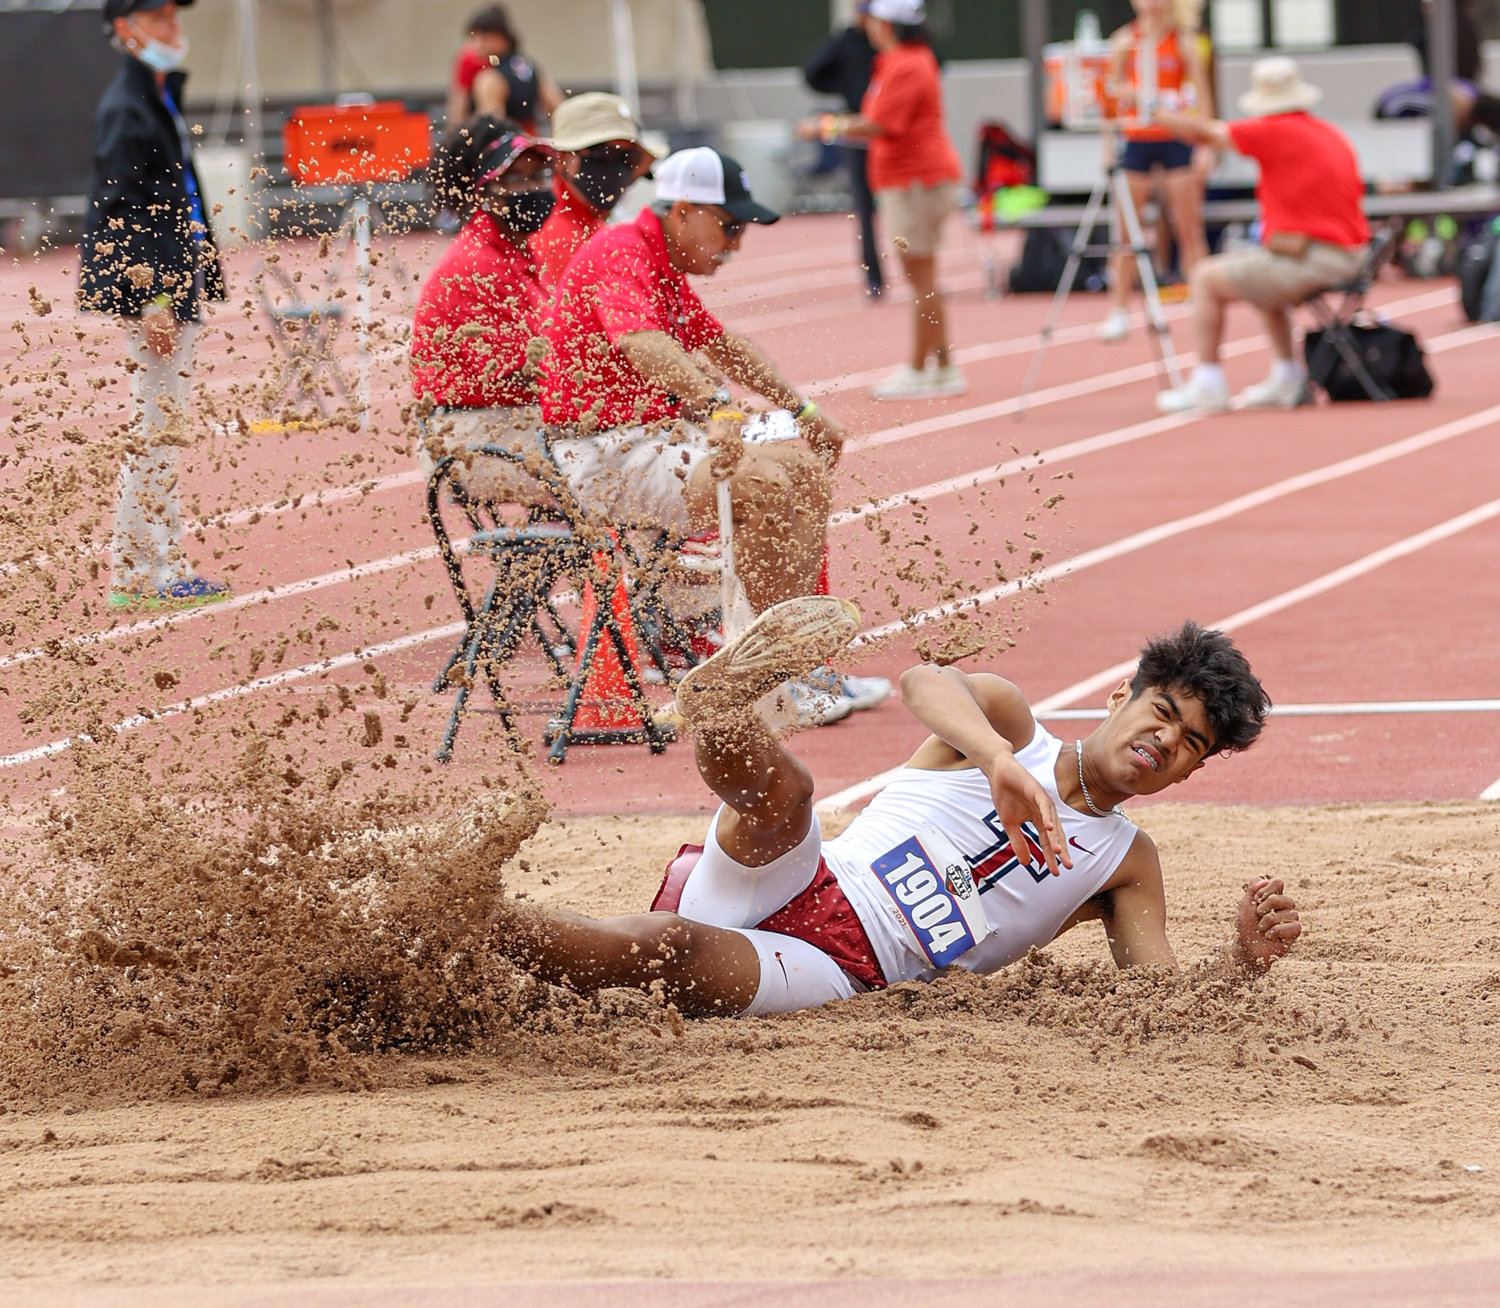 Jayden Keys of Tompkins High School competes in the Class 6A boys long jump event at the UIL State Track and Field Meet on May 8, 2021 at Mike A. Myers Stadium in Austin, Texas. Keys finished third in the event with a jump of 23-11.25.